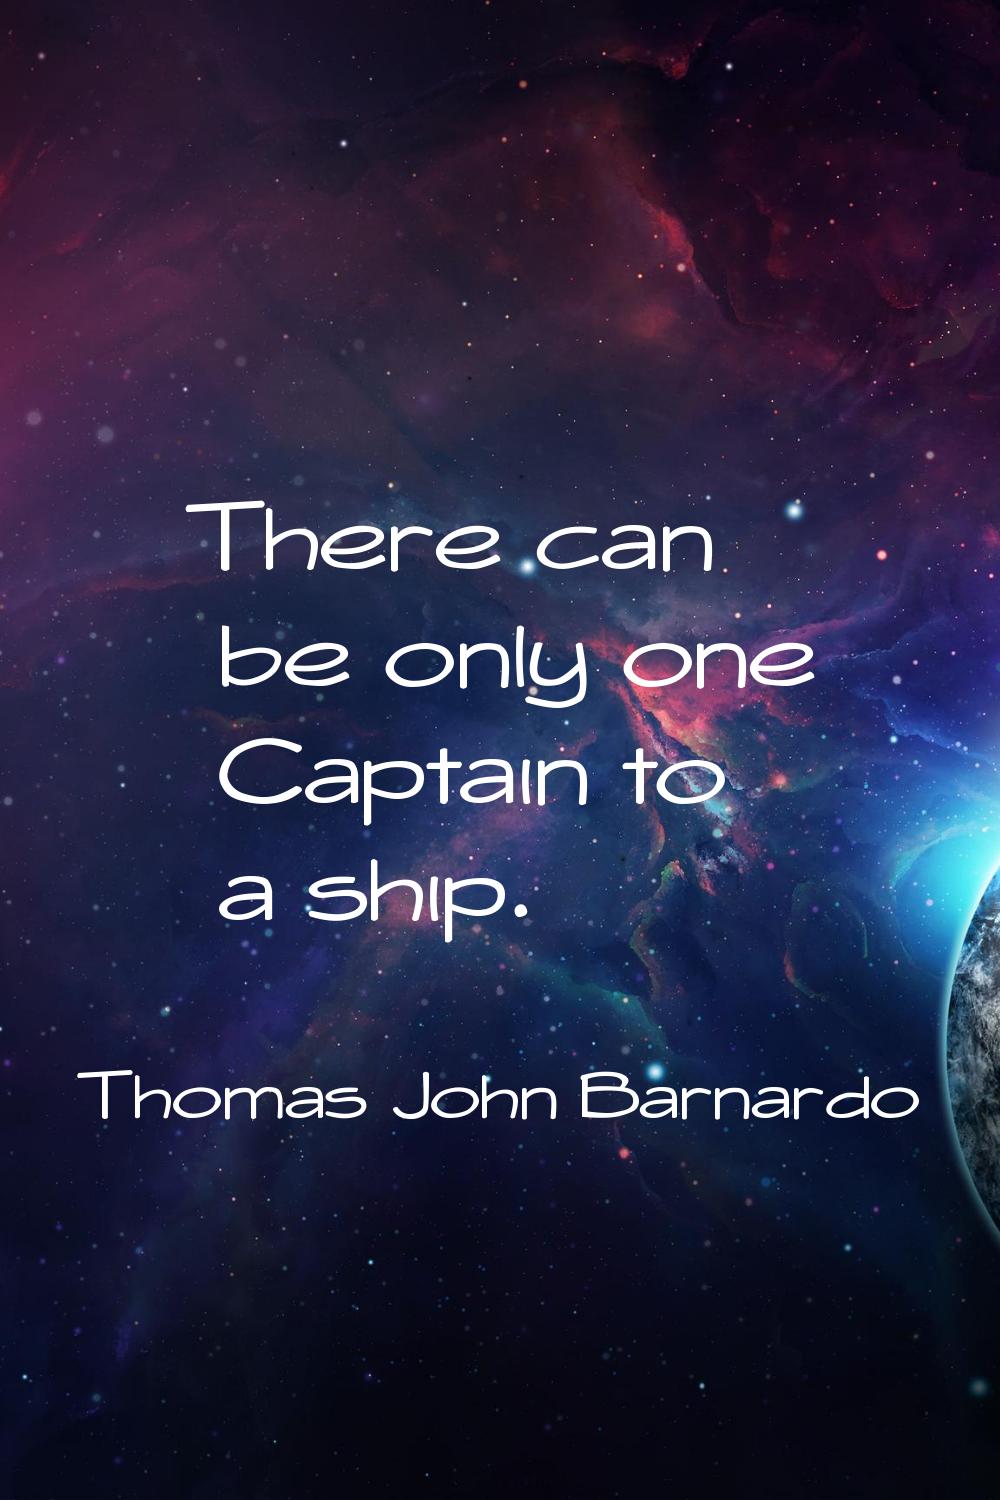 There can be only one Captain to a ship.